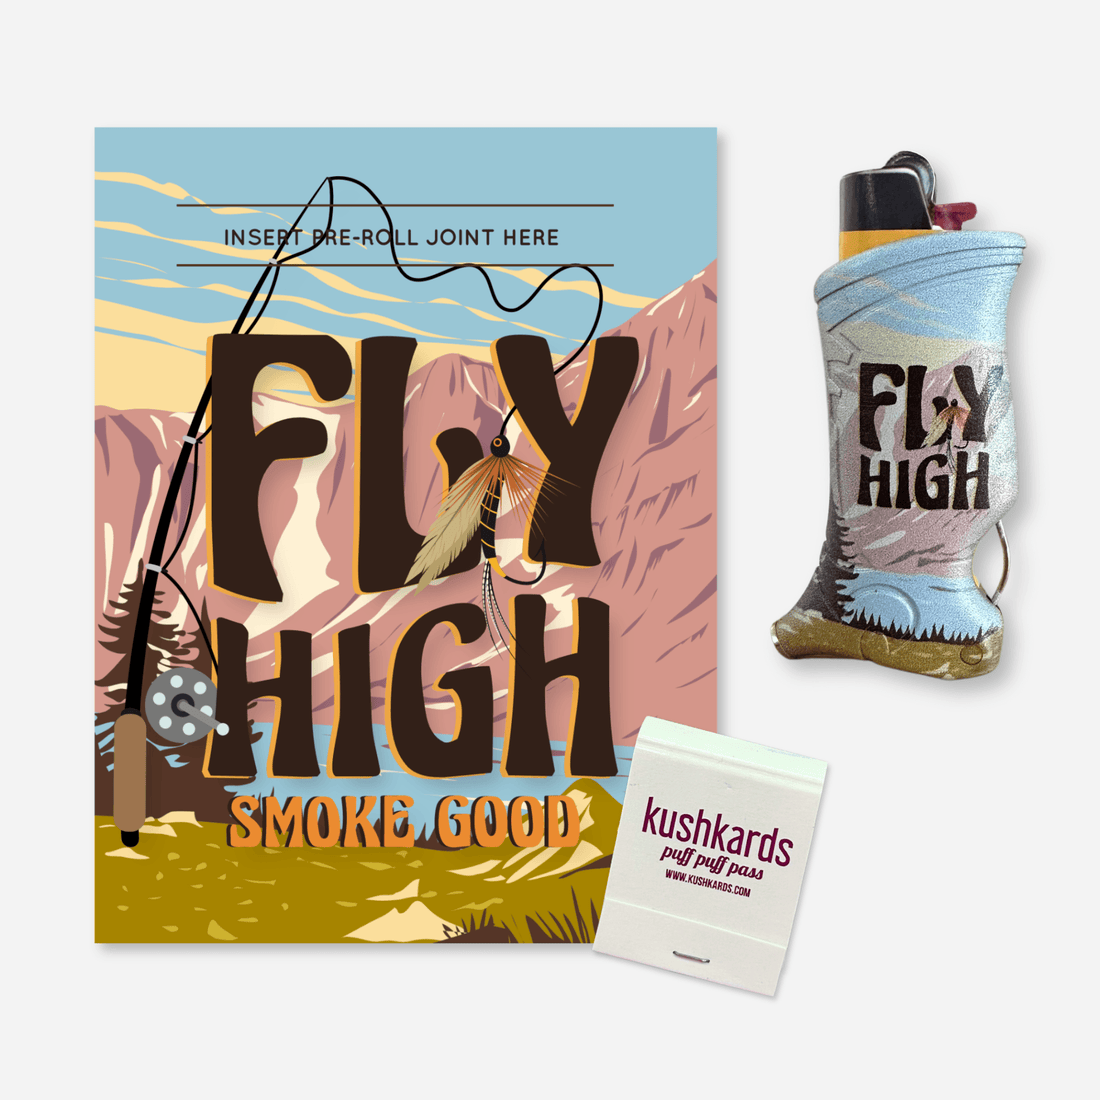 Our Fly High Flyfishing Greeting Card with Matchbook and matching Toker Poker lighter case!